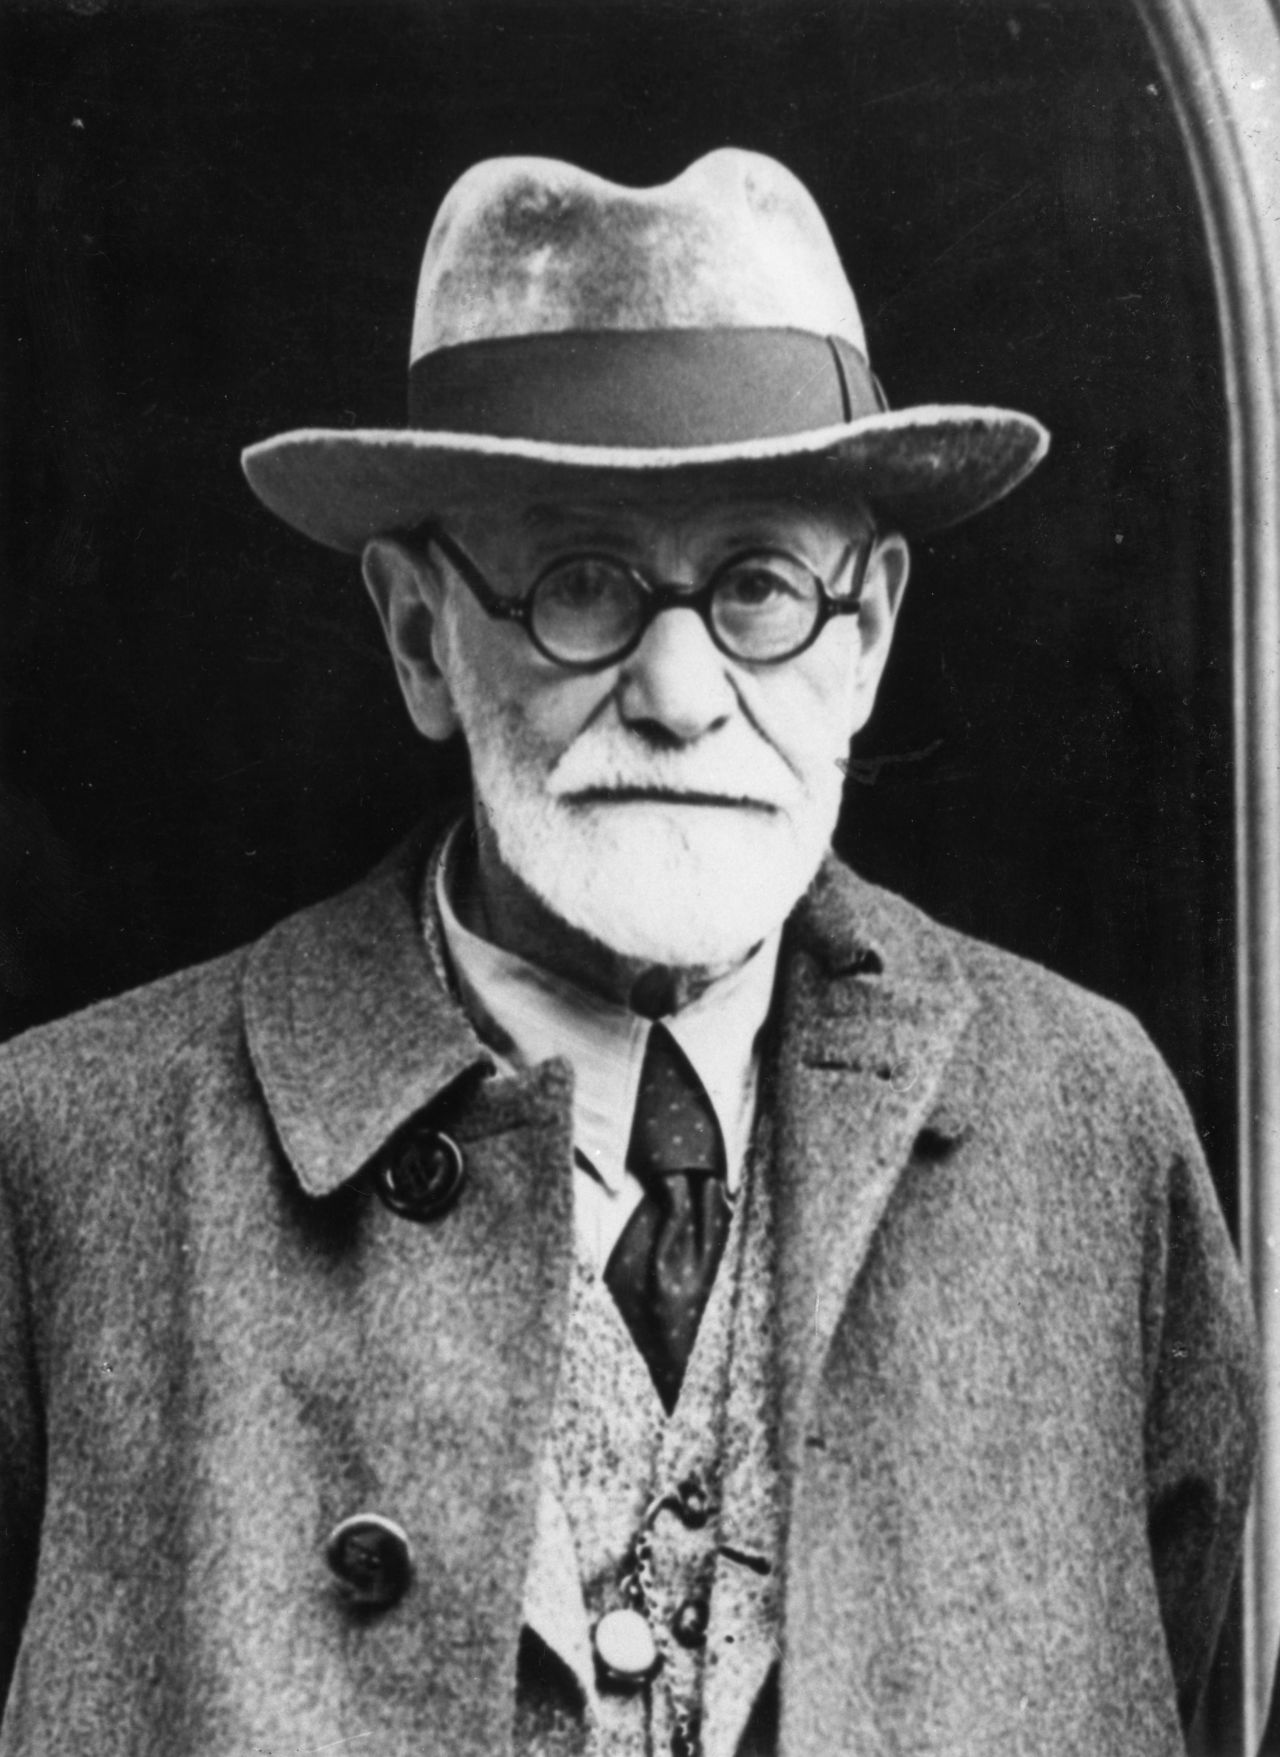 Sigmund Freud is the father of psychoanalysis, which heavily influenced the practice of psychology as we know it today. But psychoanalysis as a method is more commonly accepted in Buenos Aires compared to in the United States generally, where cognitive and behavioral approaches are more prevalent. 